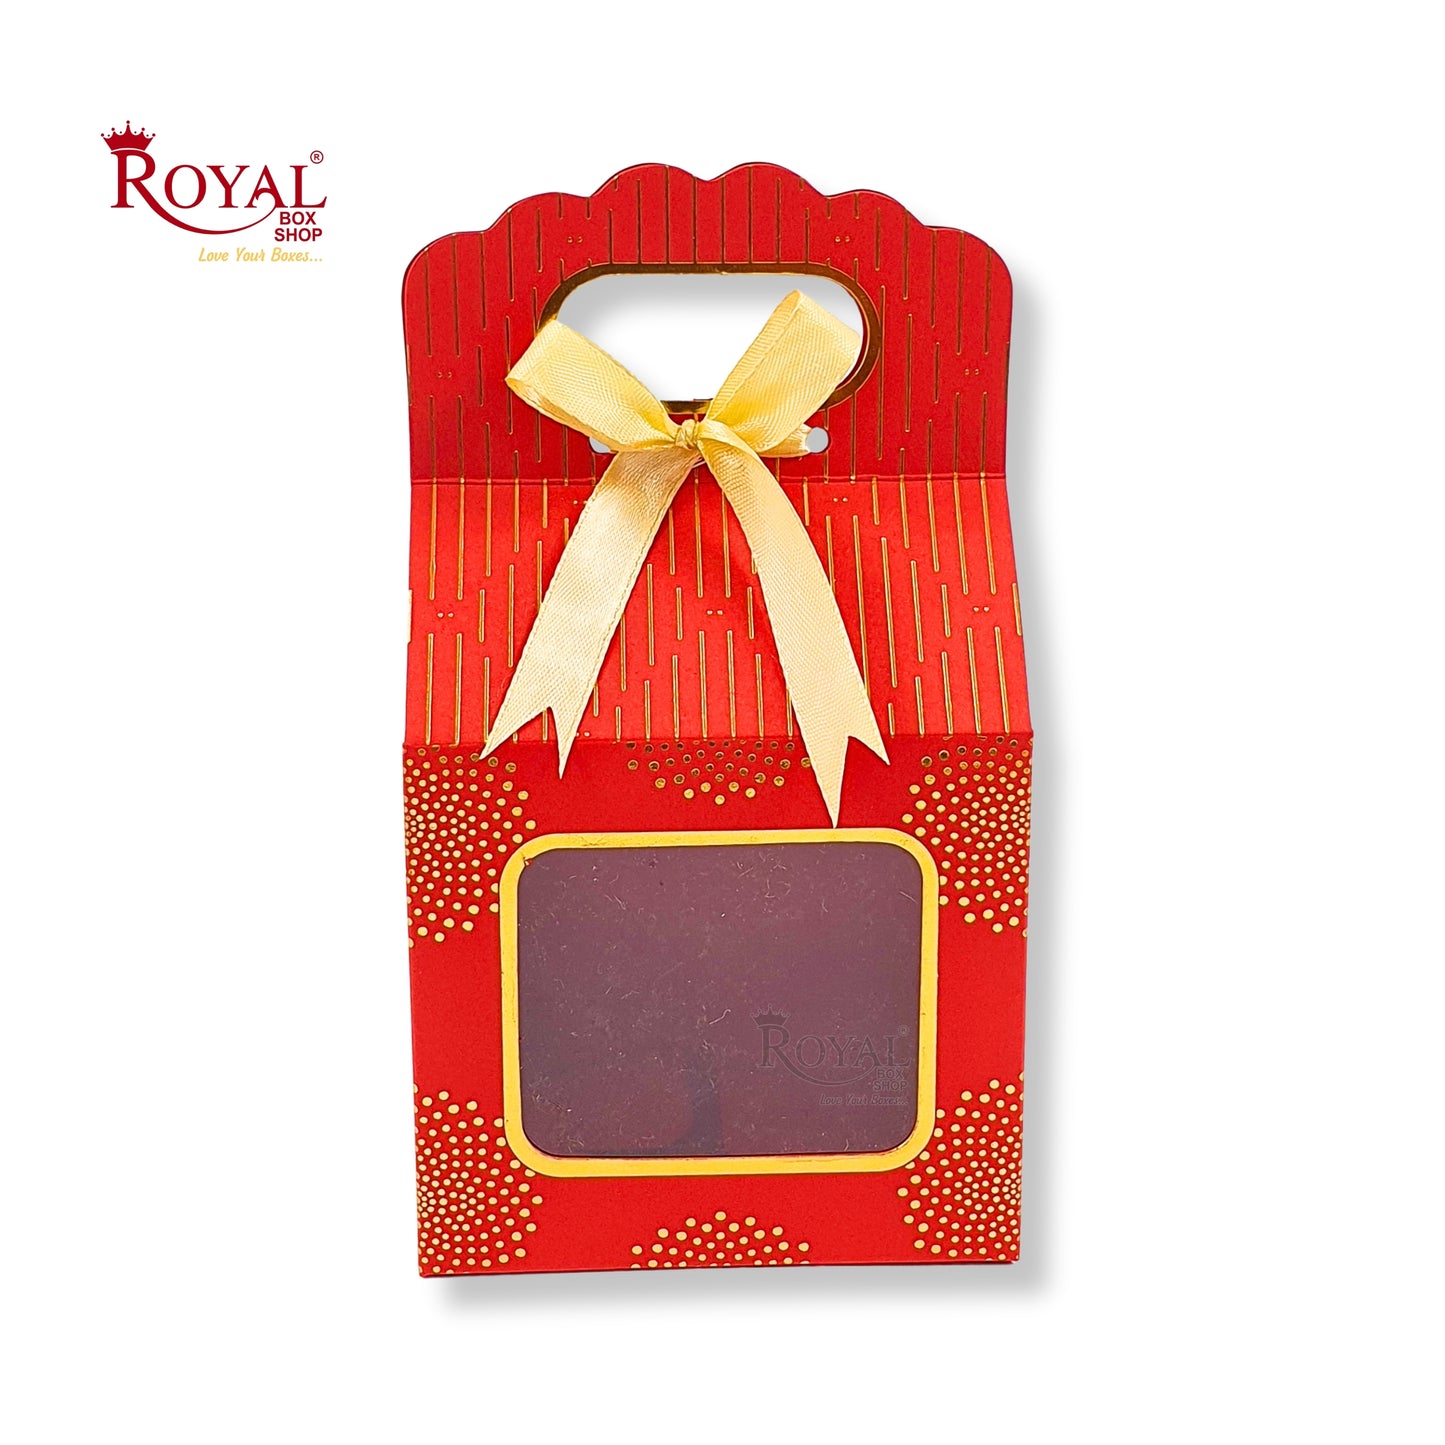 Premium Gift Box with Window I Red Gold Leaf Print I 4x2.5x3.5 inches I For Return Favor Gift, Baby Shower Gifts, Room Hampers, Candy Box, Birthday Return Gift